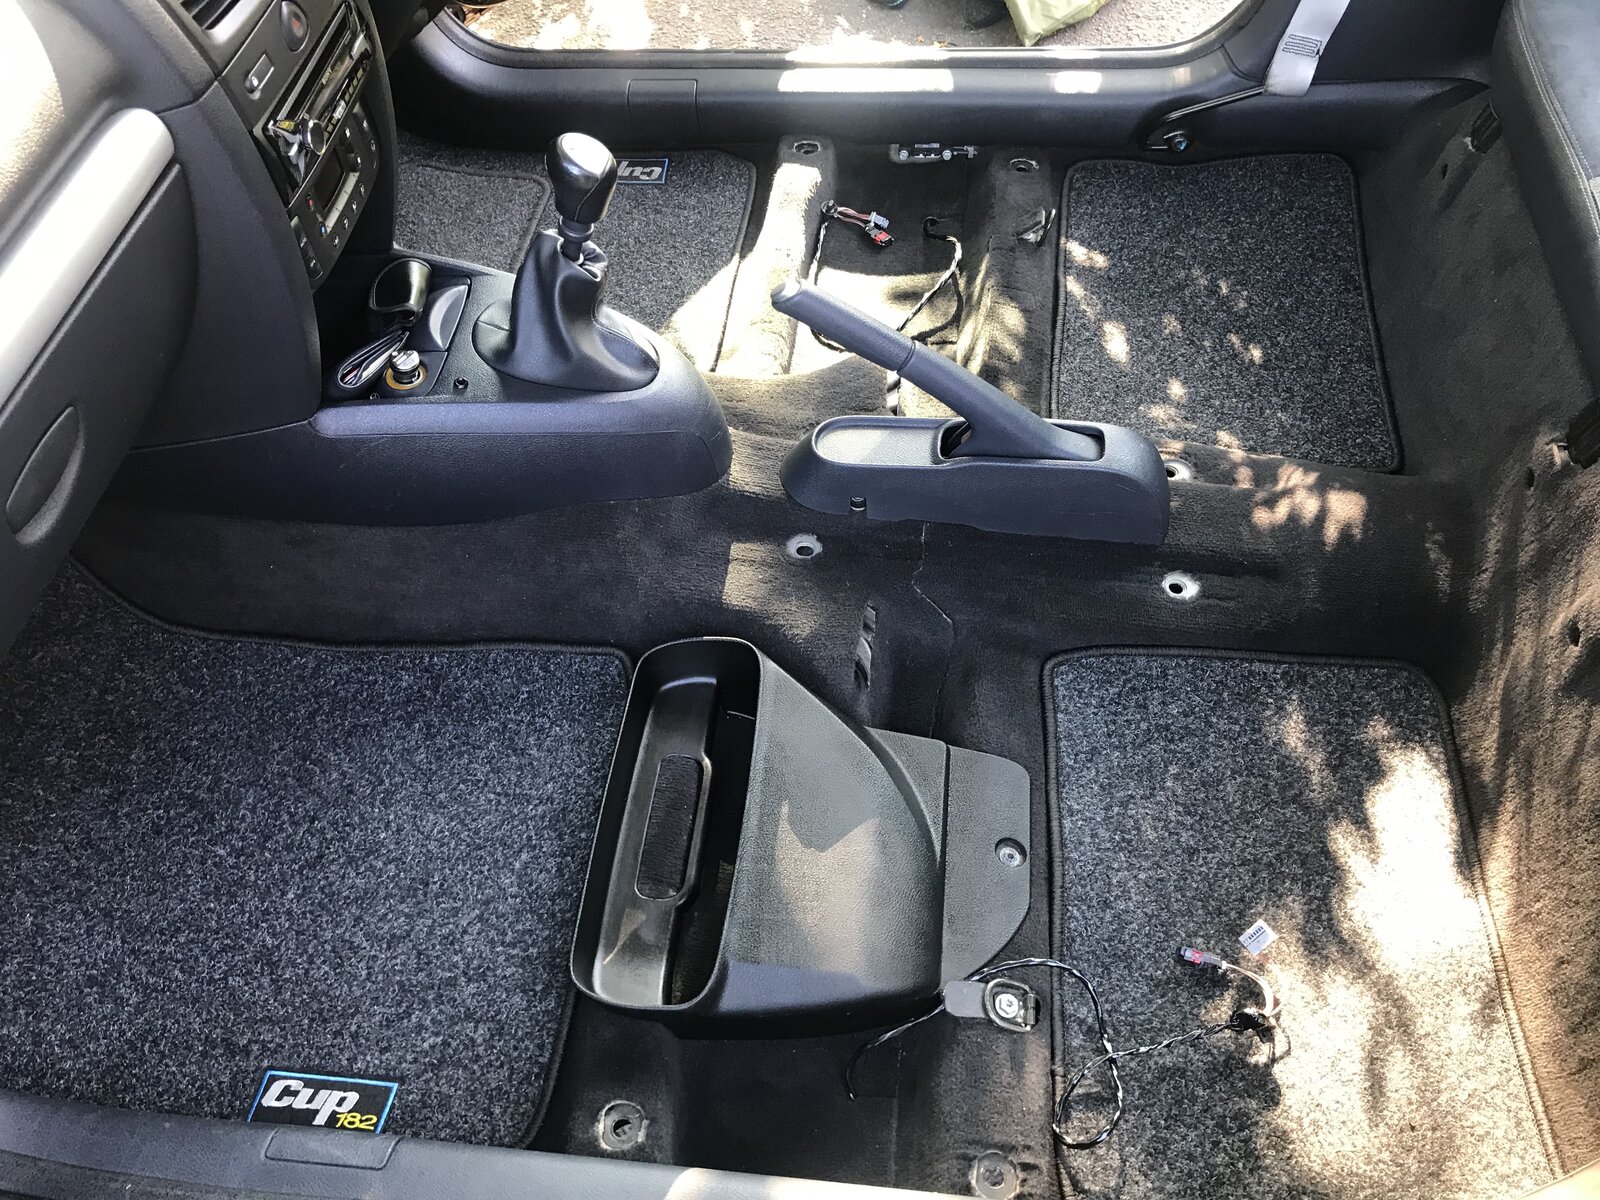 seats out clean.jpg